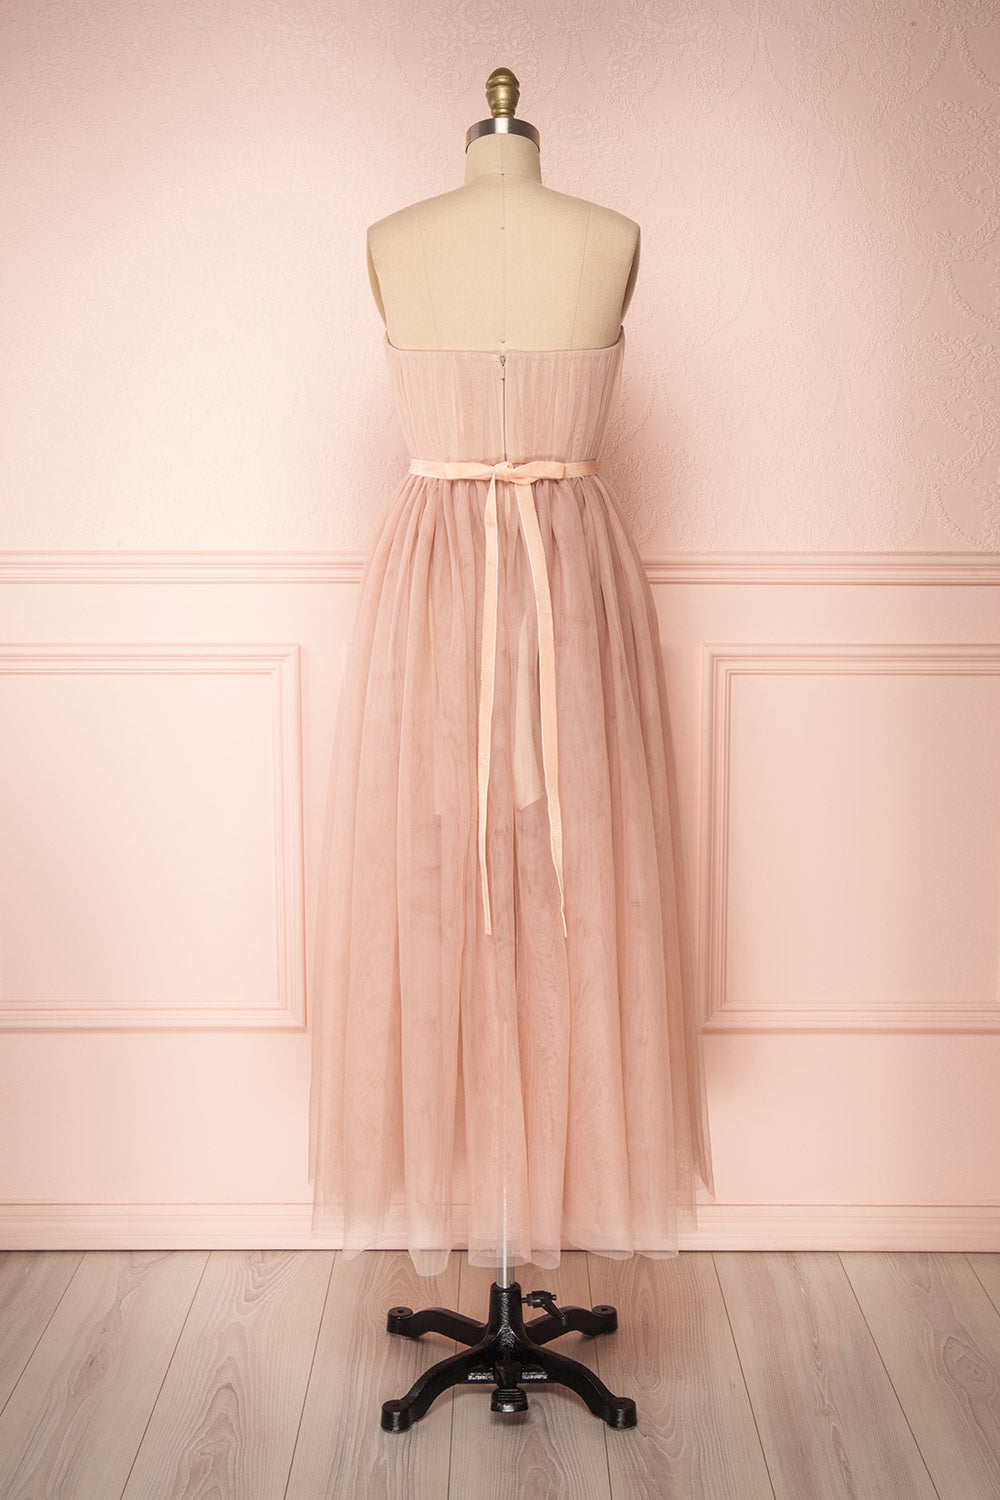 Ombeline Blush Pink Tulle Midi Bustier Dress | Boutique 1861 back view 